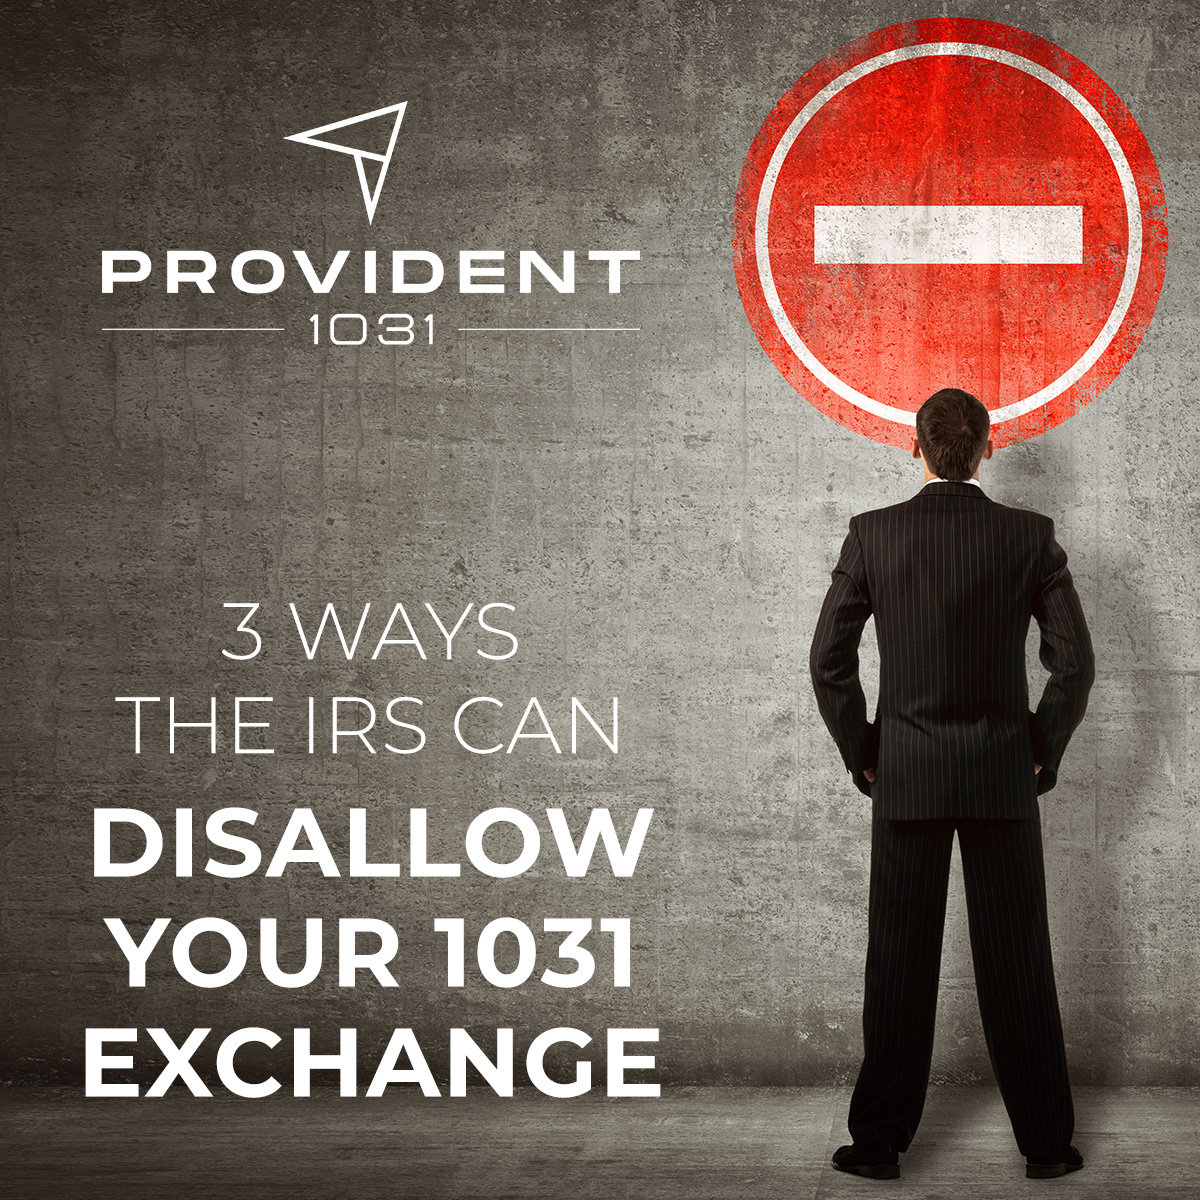 3 Ways The IRS Can Disallow Your 1031 Exchange